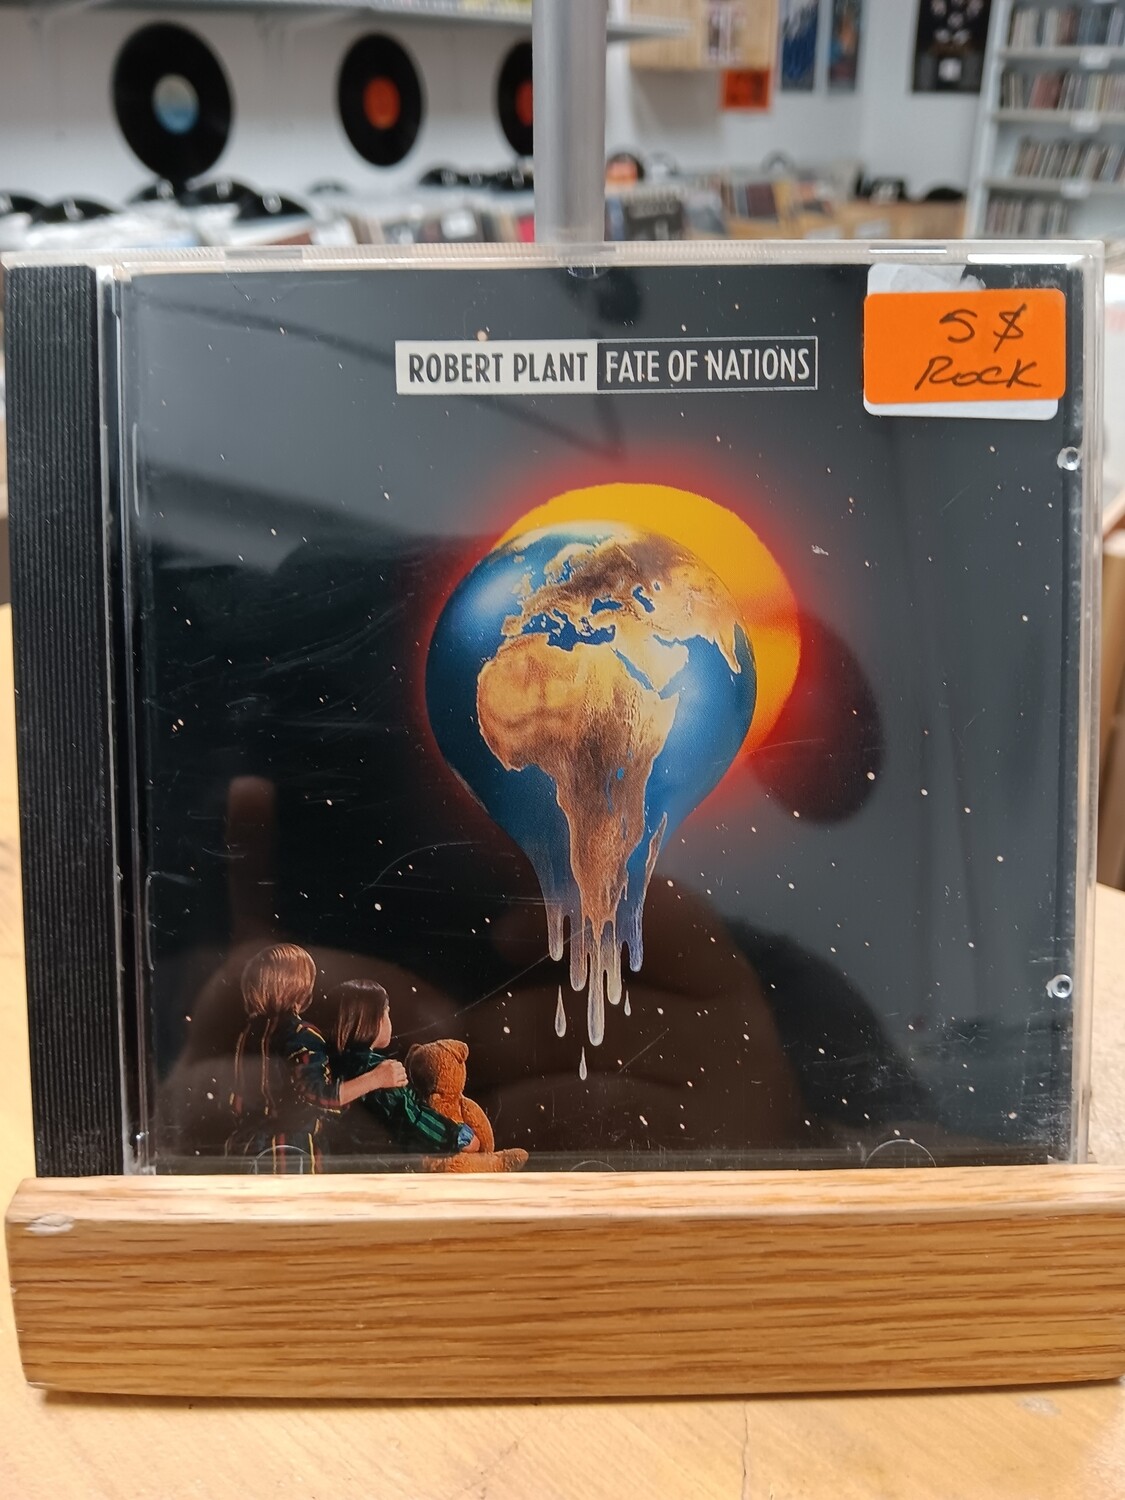 Robert Plant - Fate of nations (CD)